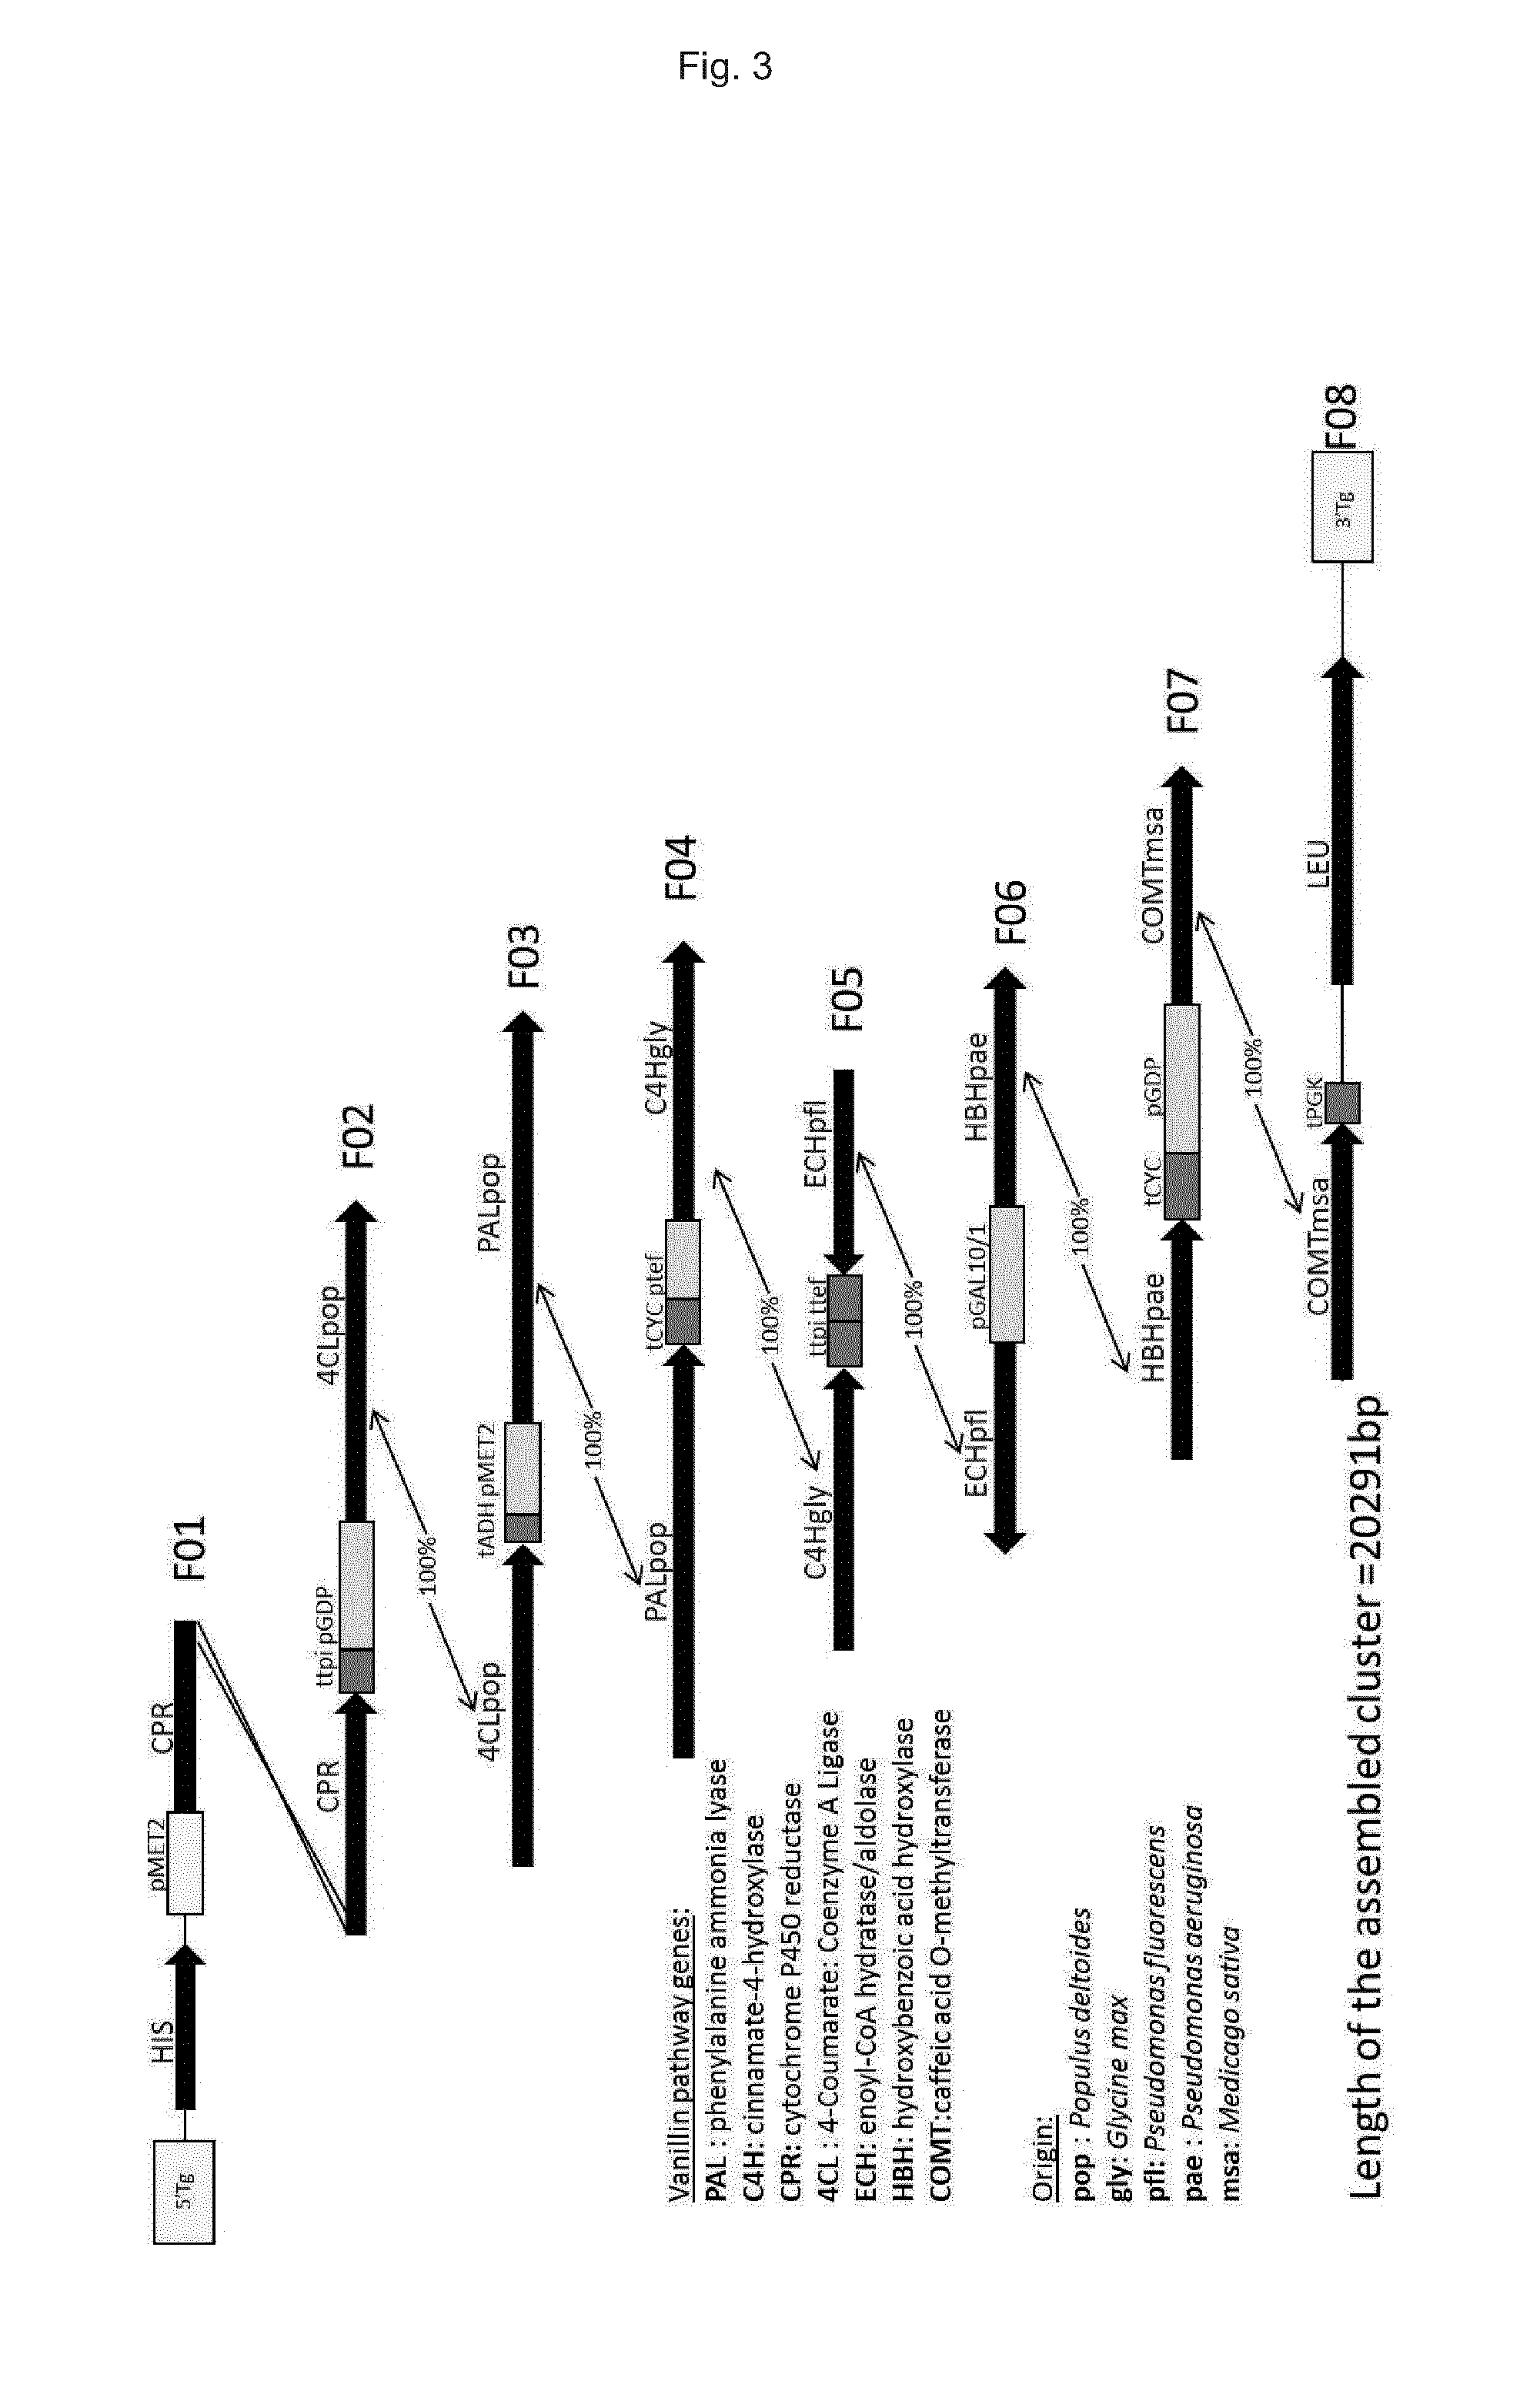 Recombinant host cell for biosynthetic production